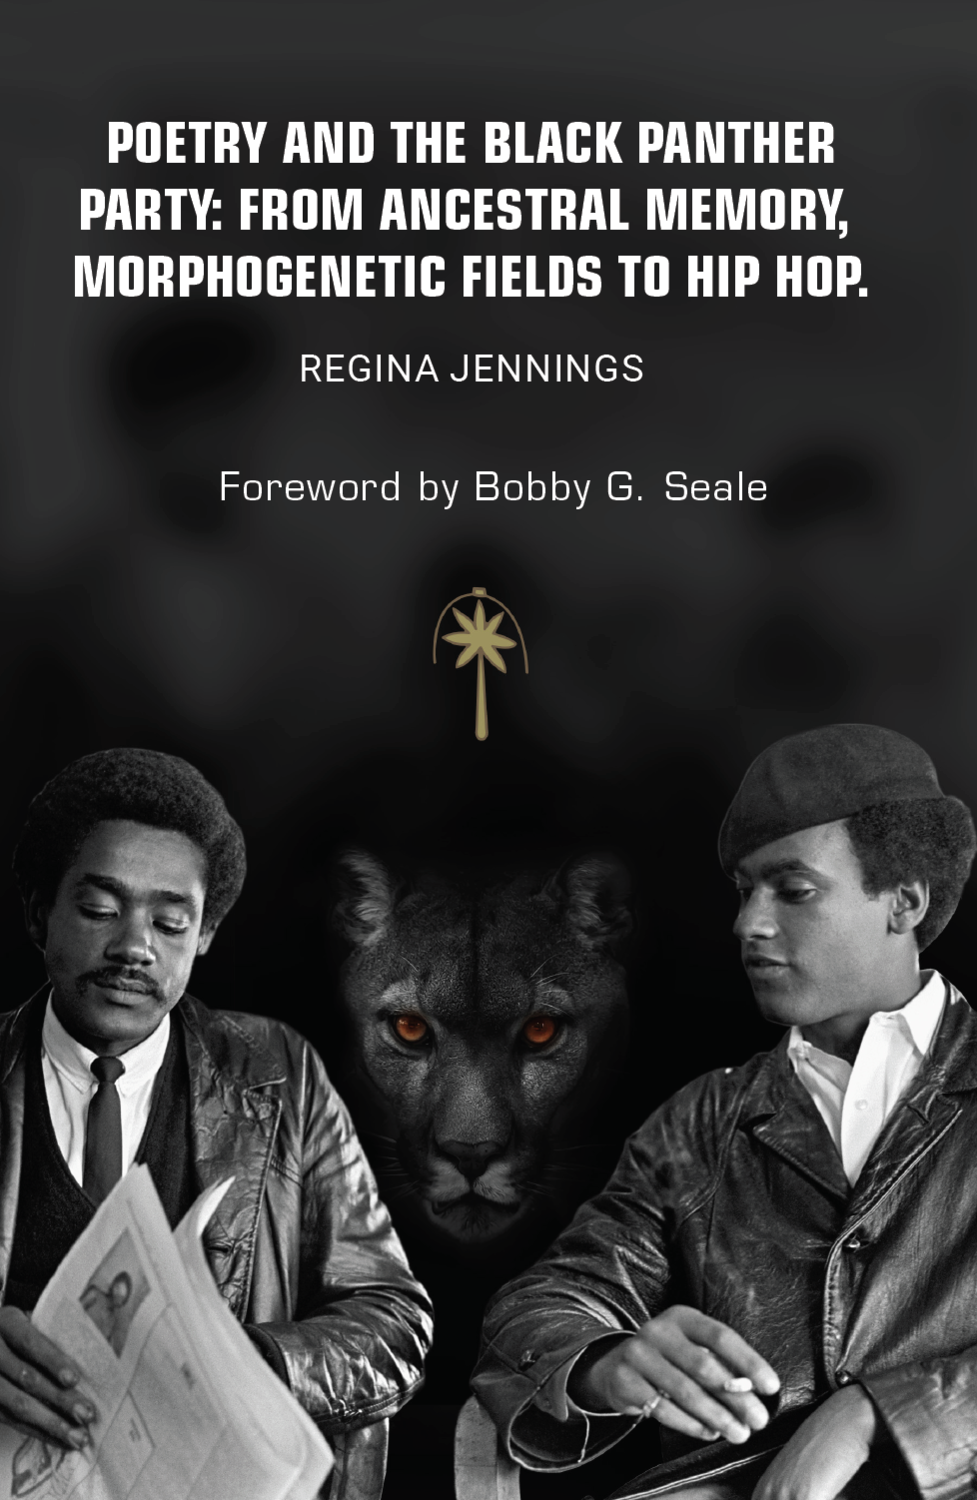 Poetry and the Black Panther Party: From Ancestral Memory, Morphogenetic Fields to Hip Hop ($35)